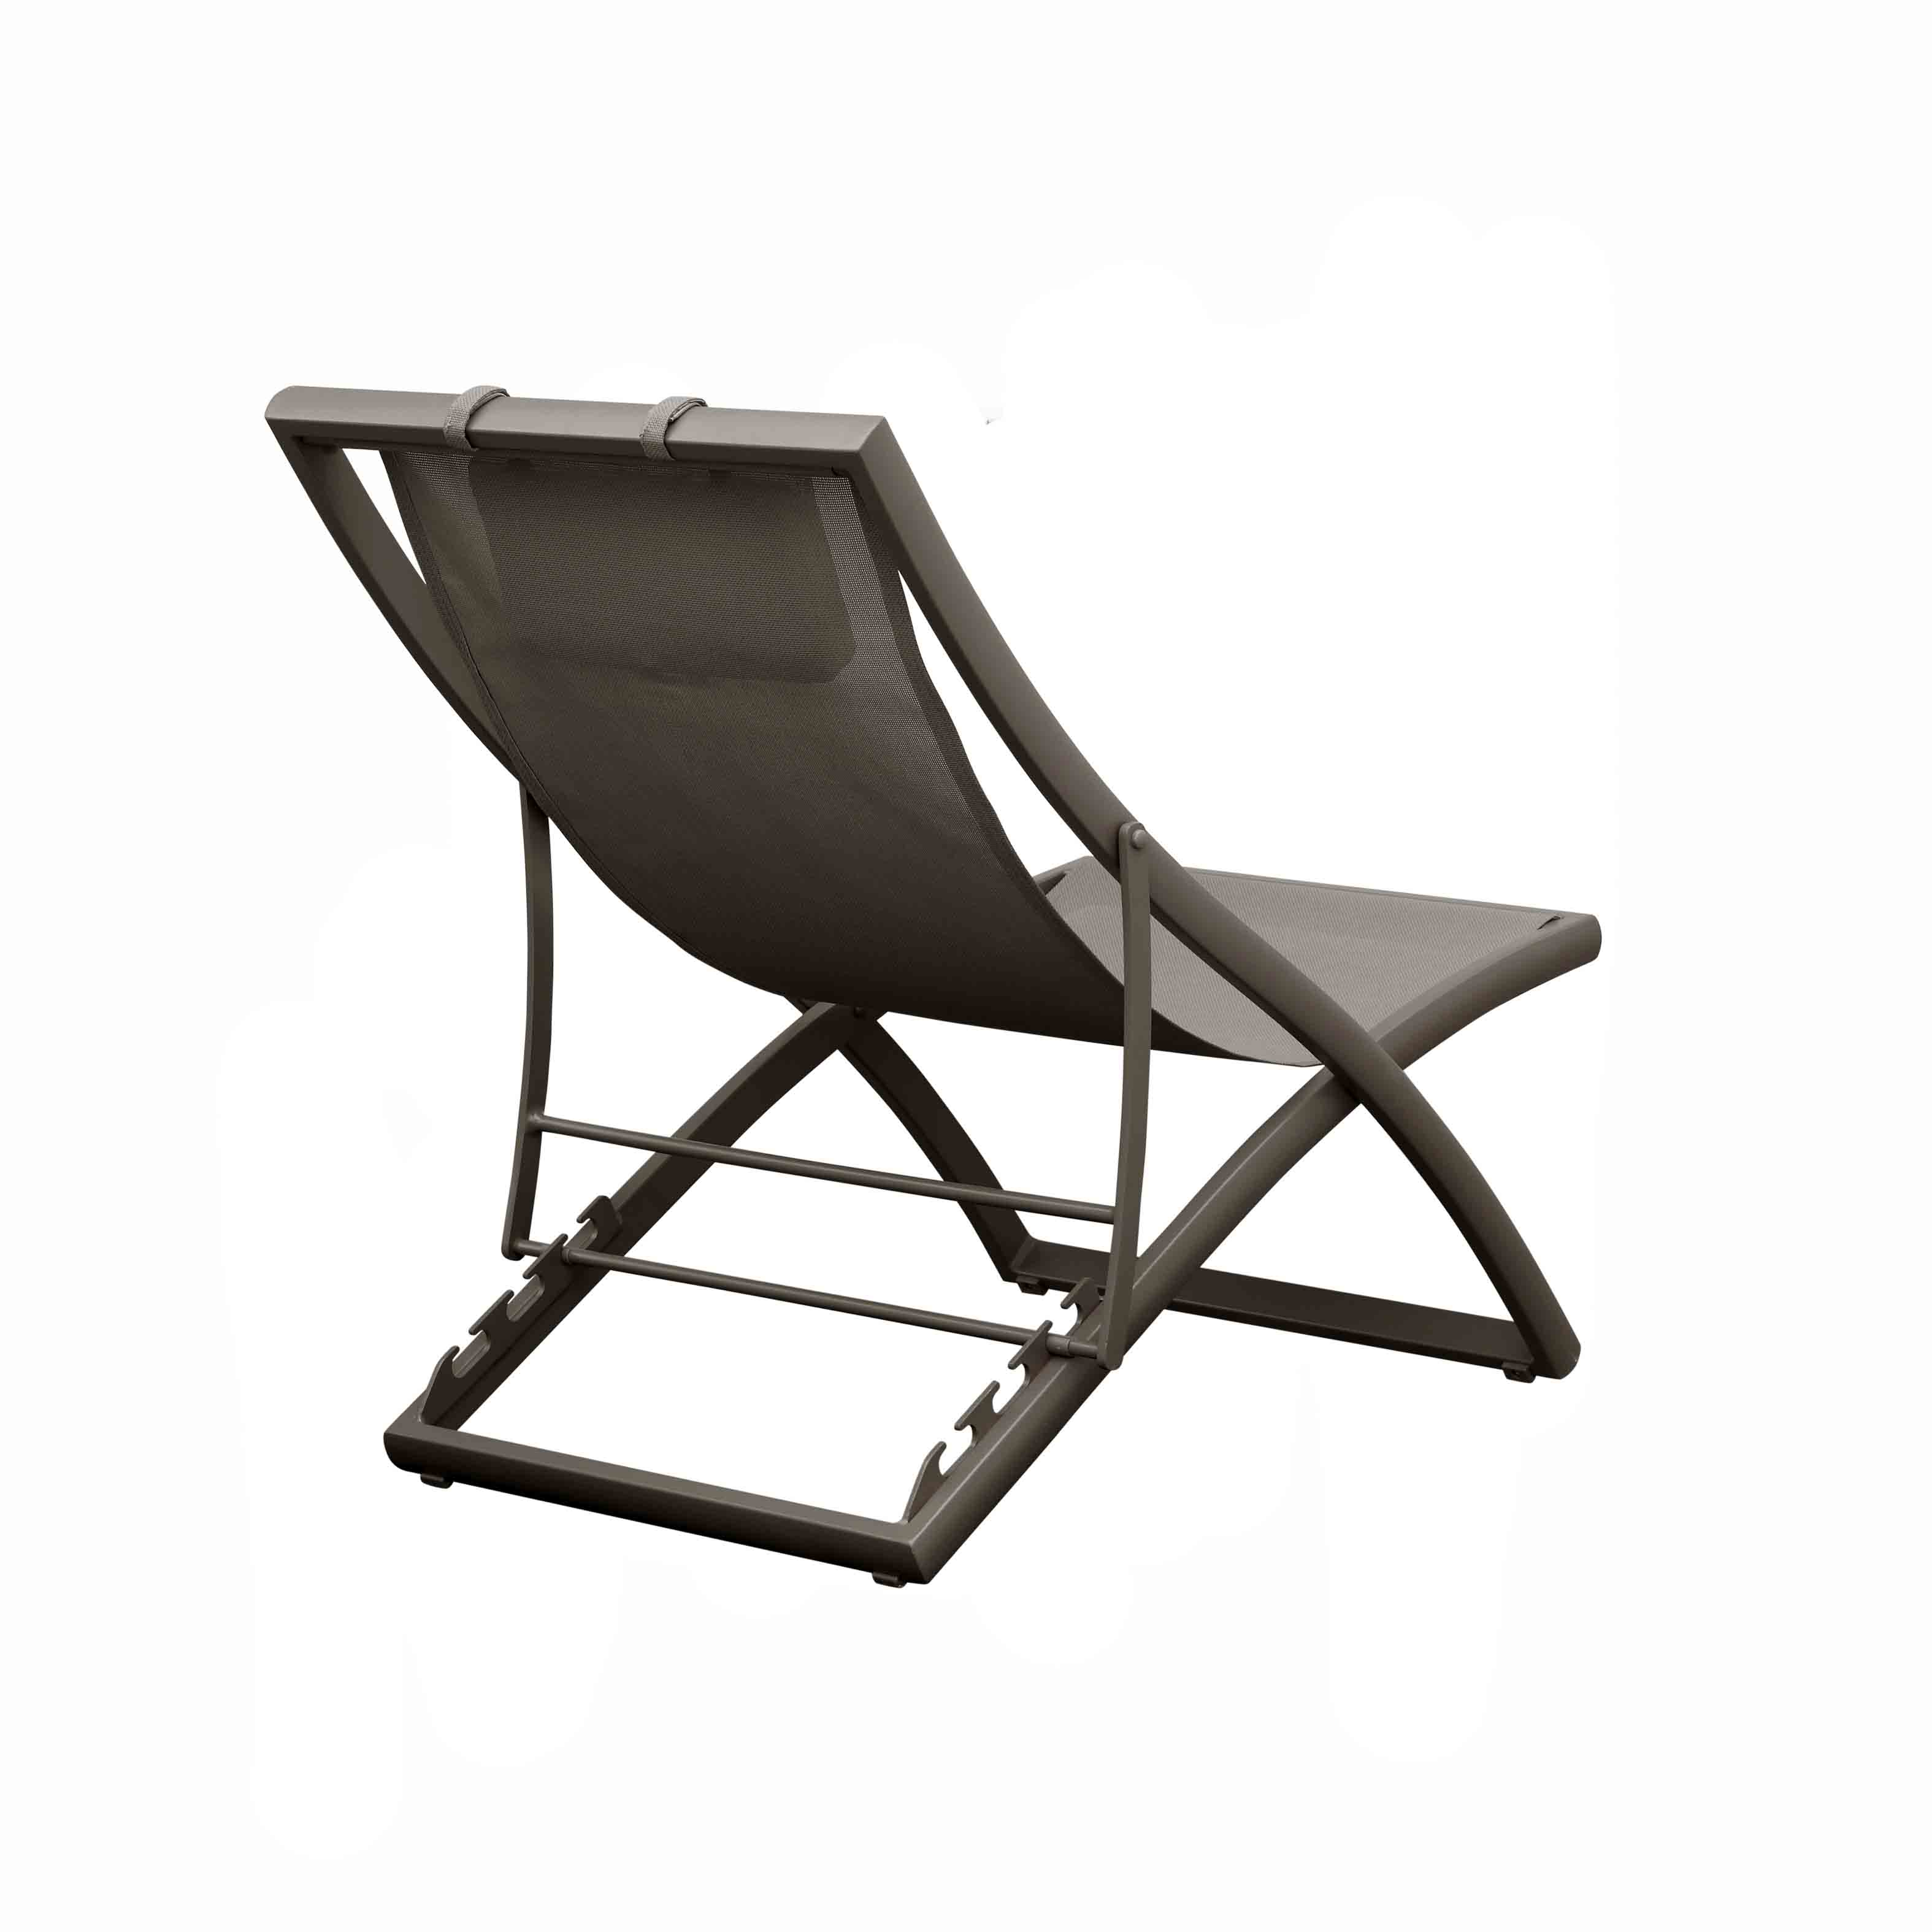 Tiffany sling relax chair S3